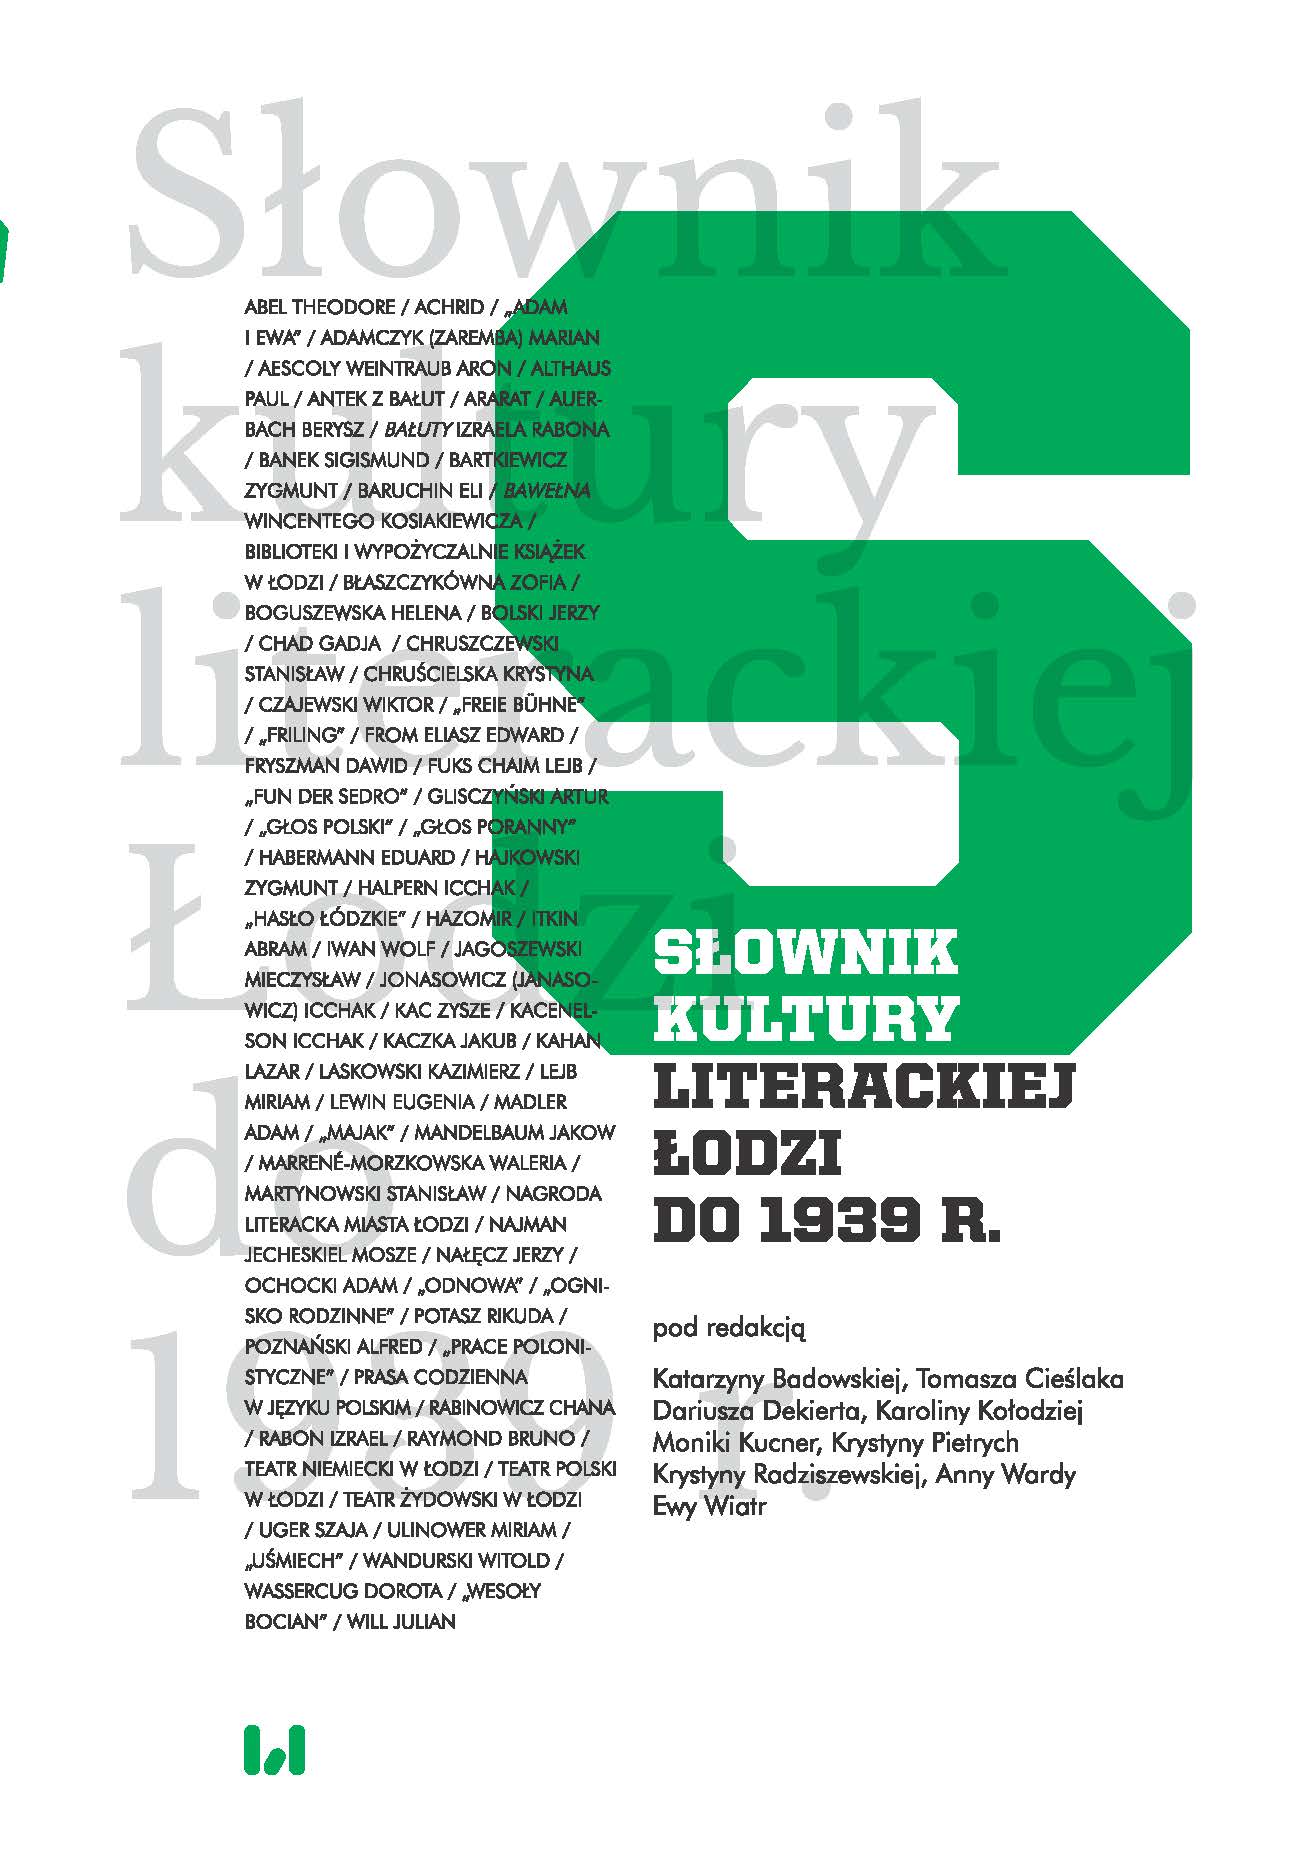 Dictionary of Literary Culture of Łódź until 1939 Cover Image